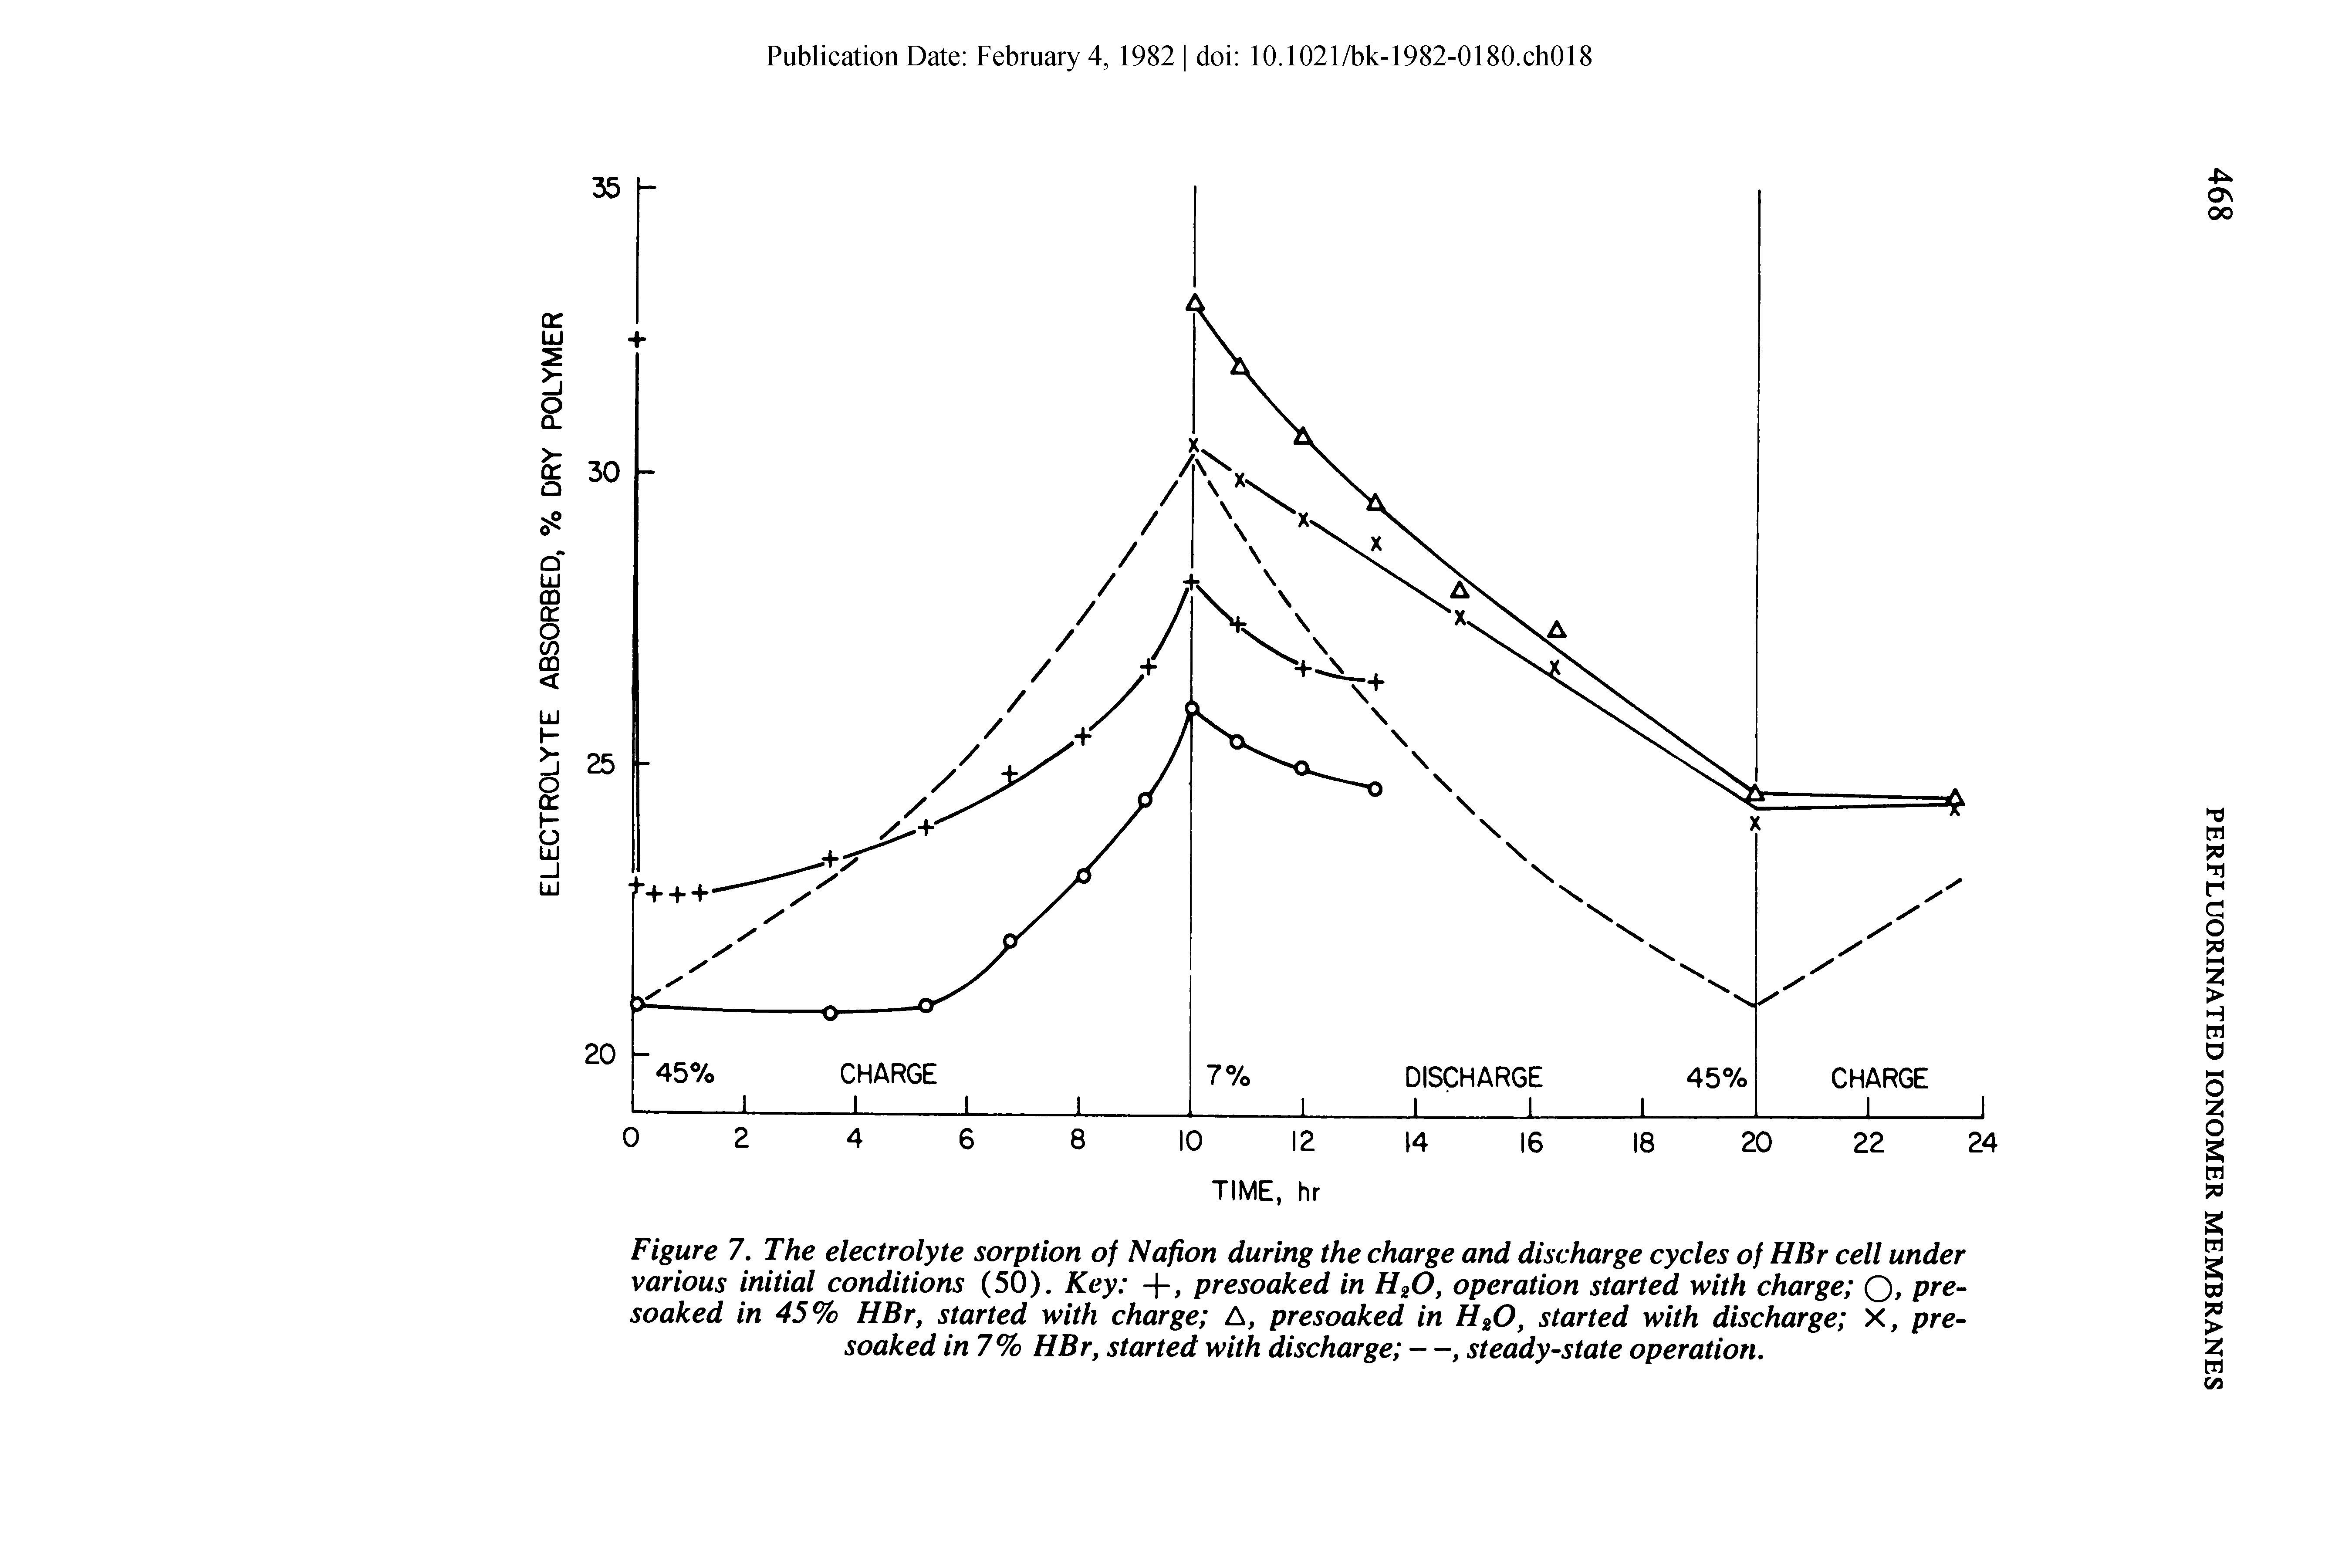 Figure 7. The electrolyte sorption of Nafion during the charge and discharge cycles of HBr cell under various initial conditions (50). Key +, presoaked in H20, operation started with charge Q, presoaked in 45% HBr, started with charge A, presoaked in H20, started with discharge X, presoaked in 7 % HBr, started with discharge —, steady-state operation.